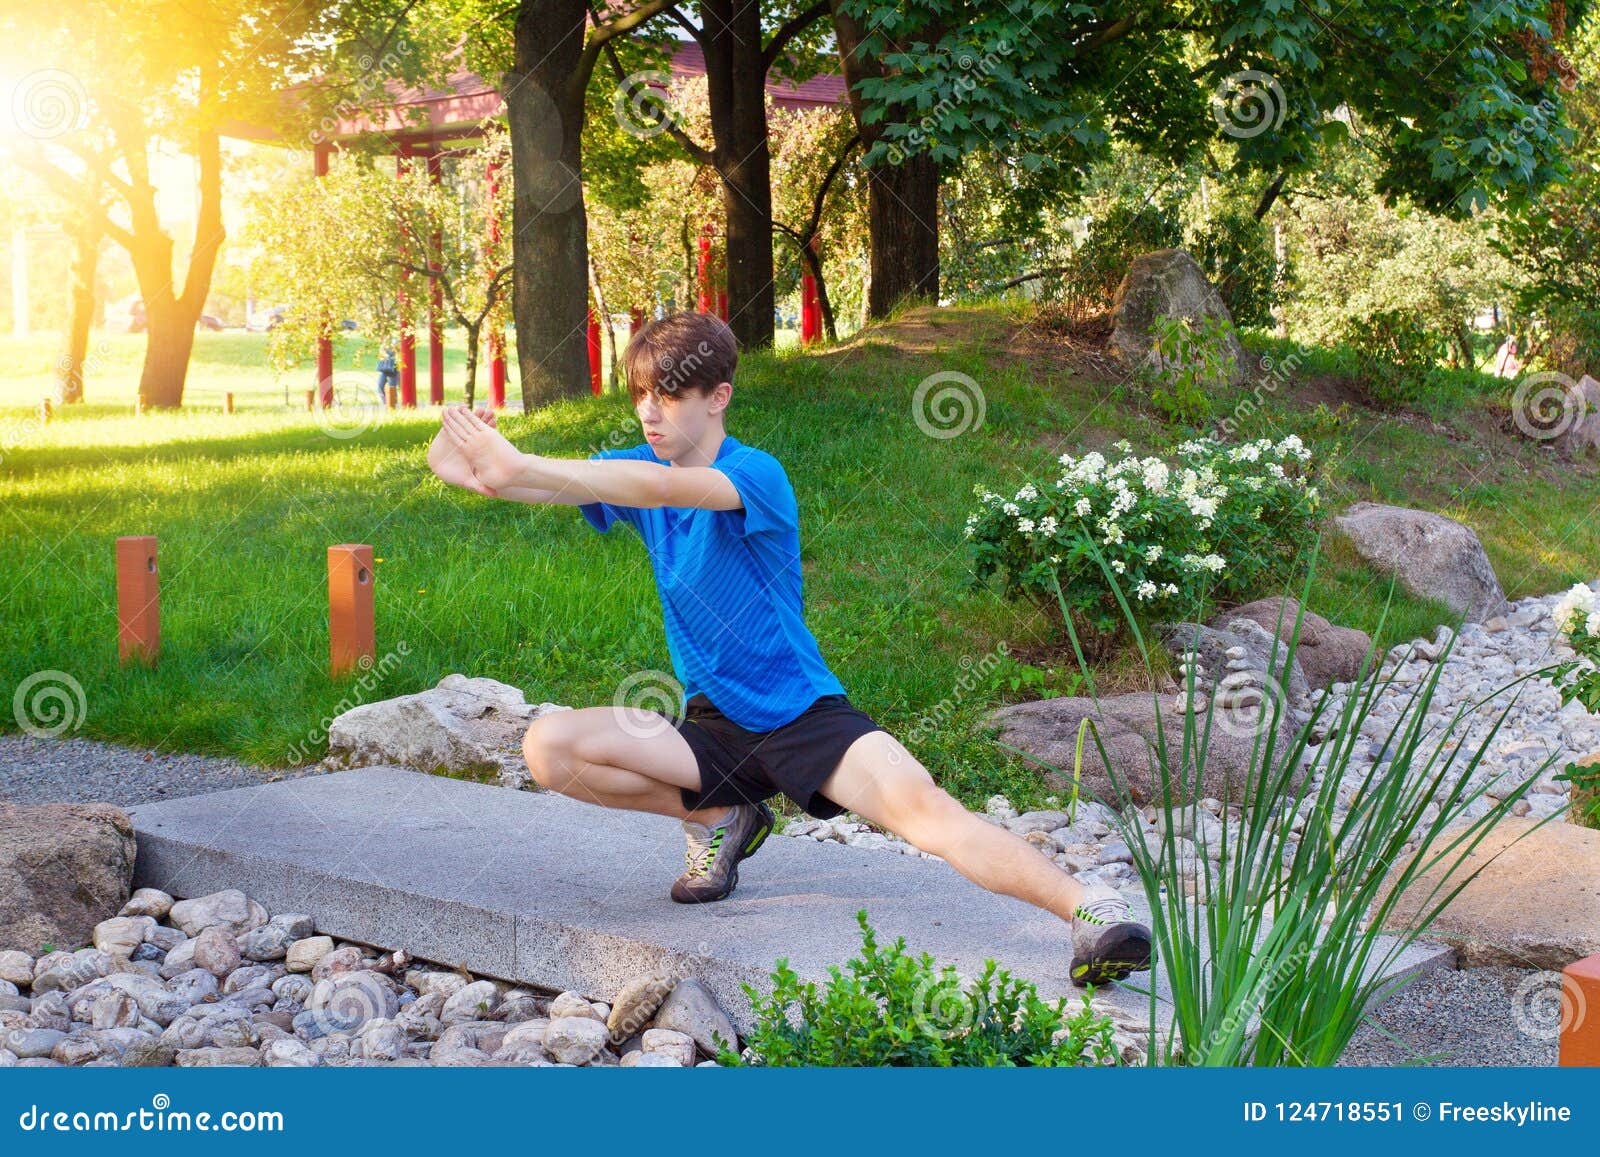 Young Fit Man Exercising in Park Stock Image - Image of closeup, school ...